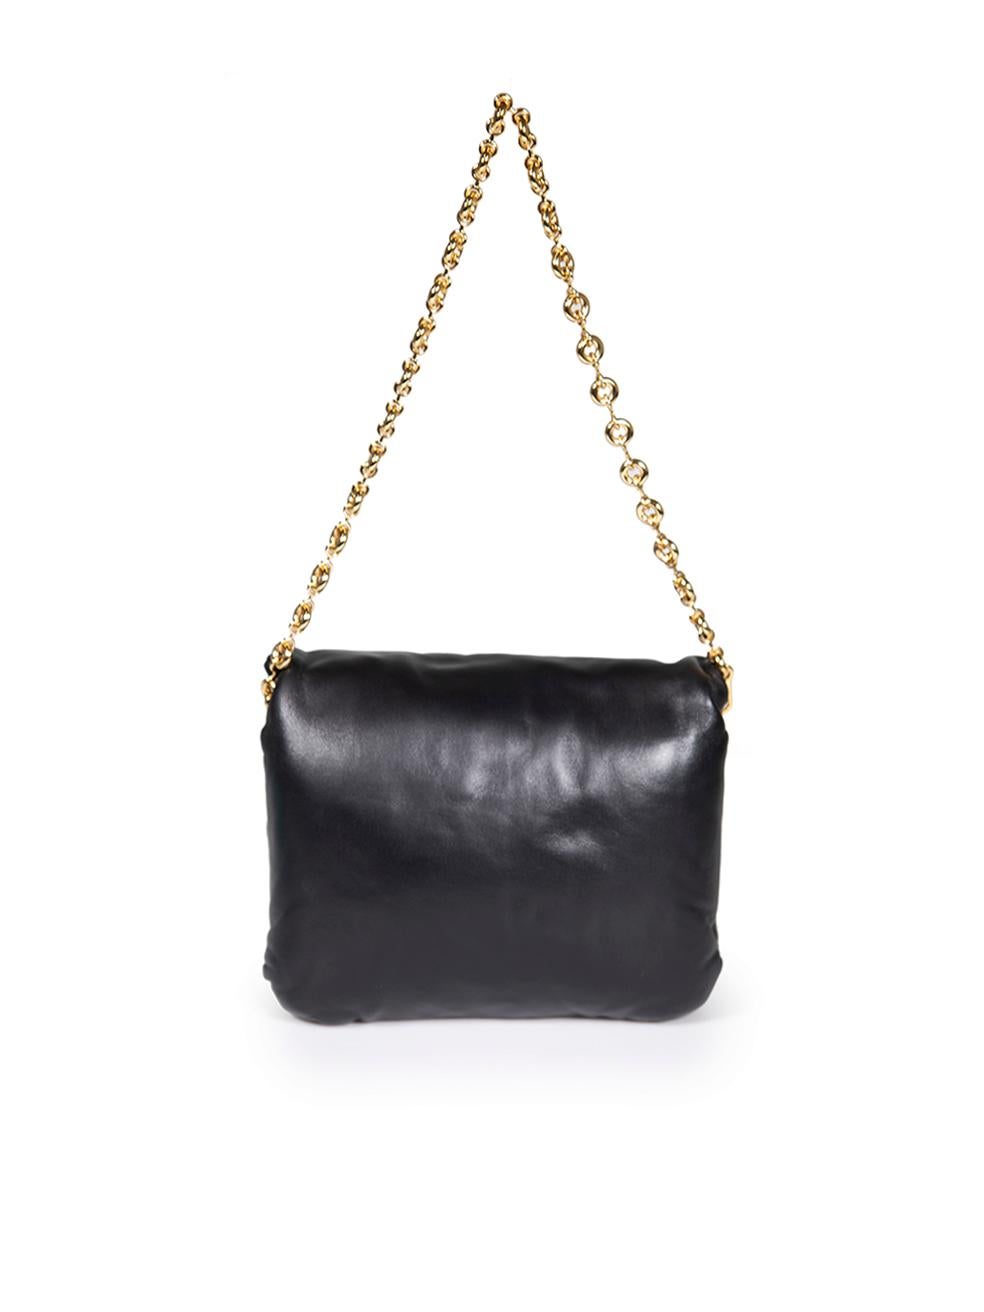 Loewe Black Nappa Leather Puffer Goya Shoulder Bag In New Condition For Sale In London, GB